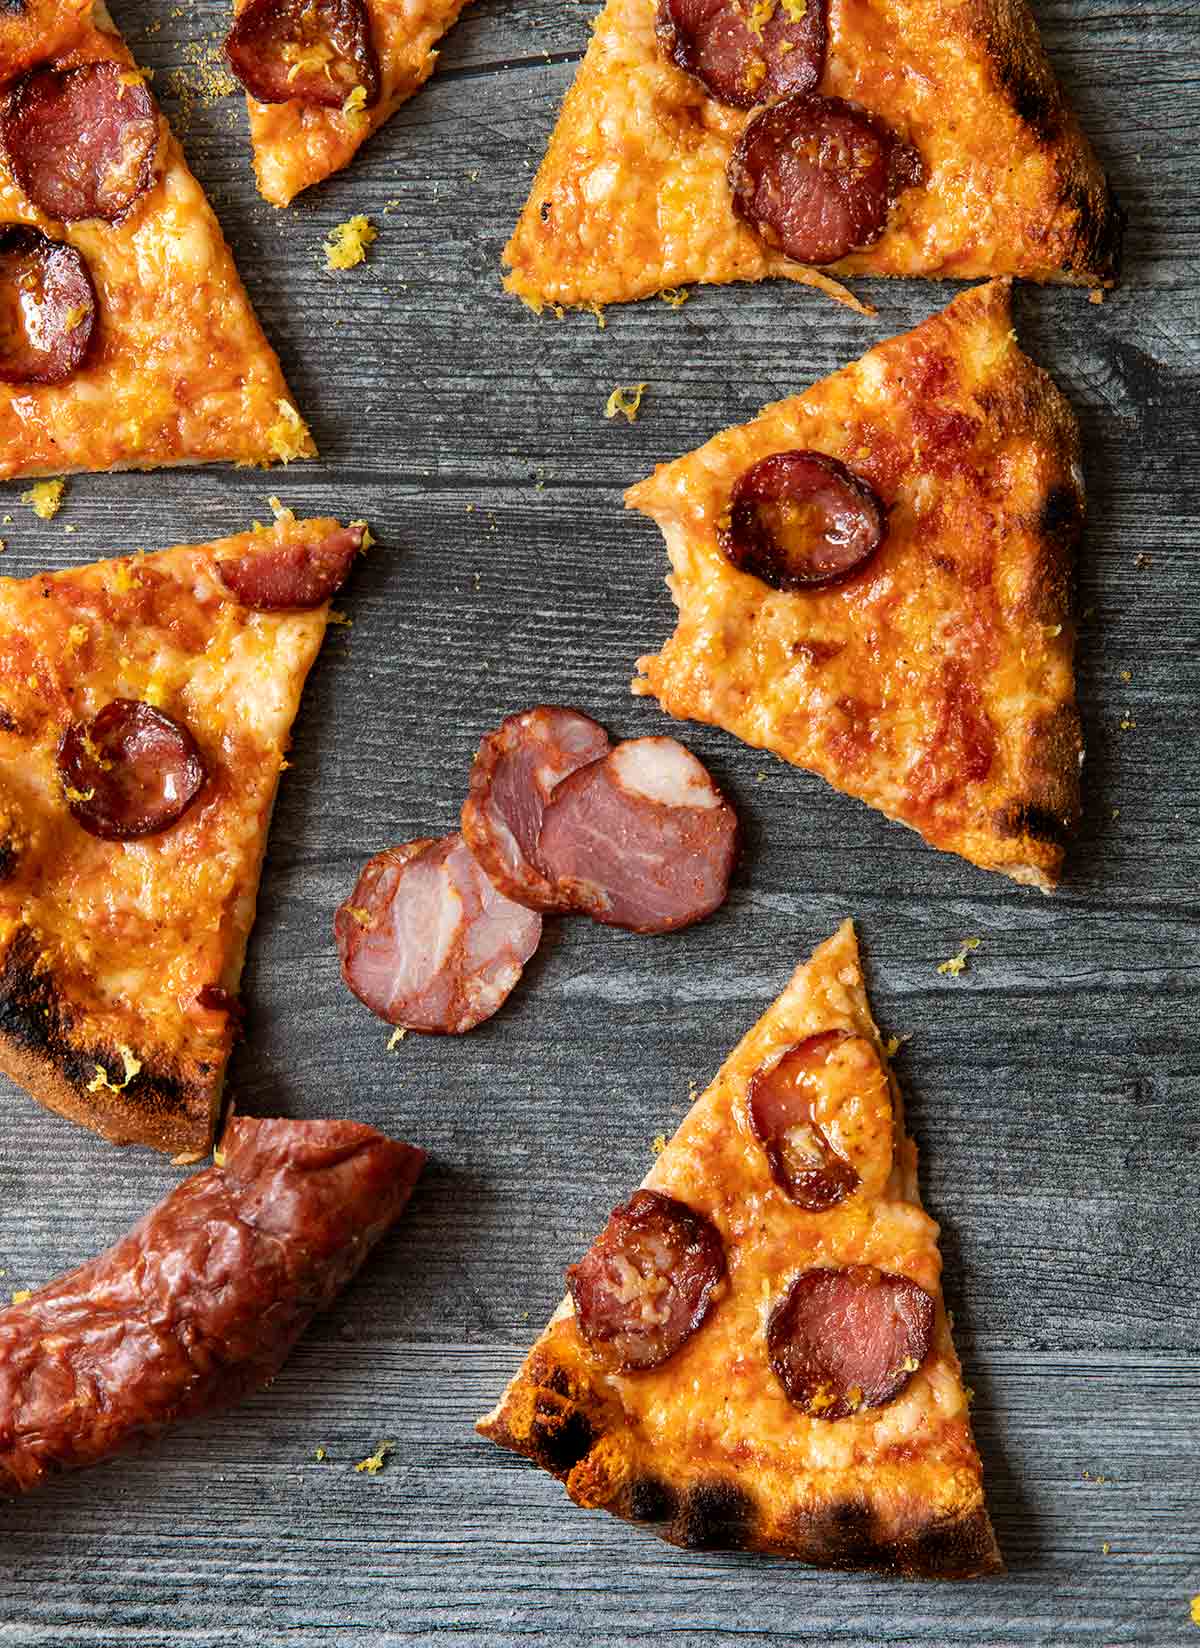 Sic slices An Ooni pizza with Portuguese sausage and cheese on gray weathered wood, with chouriço.